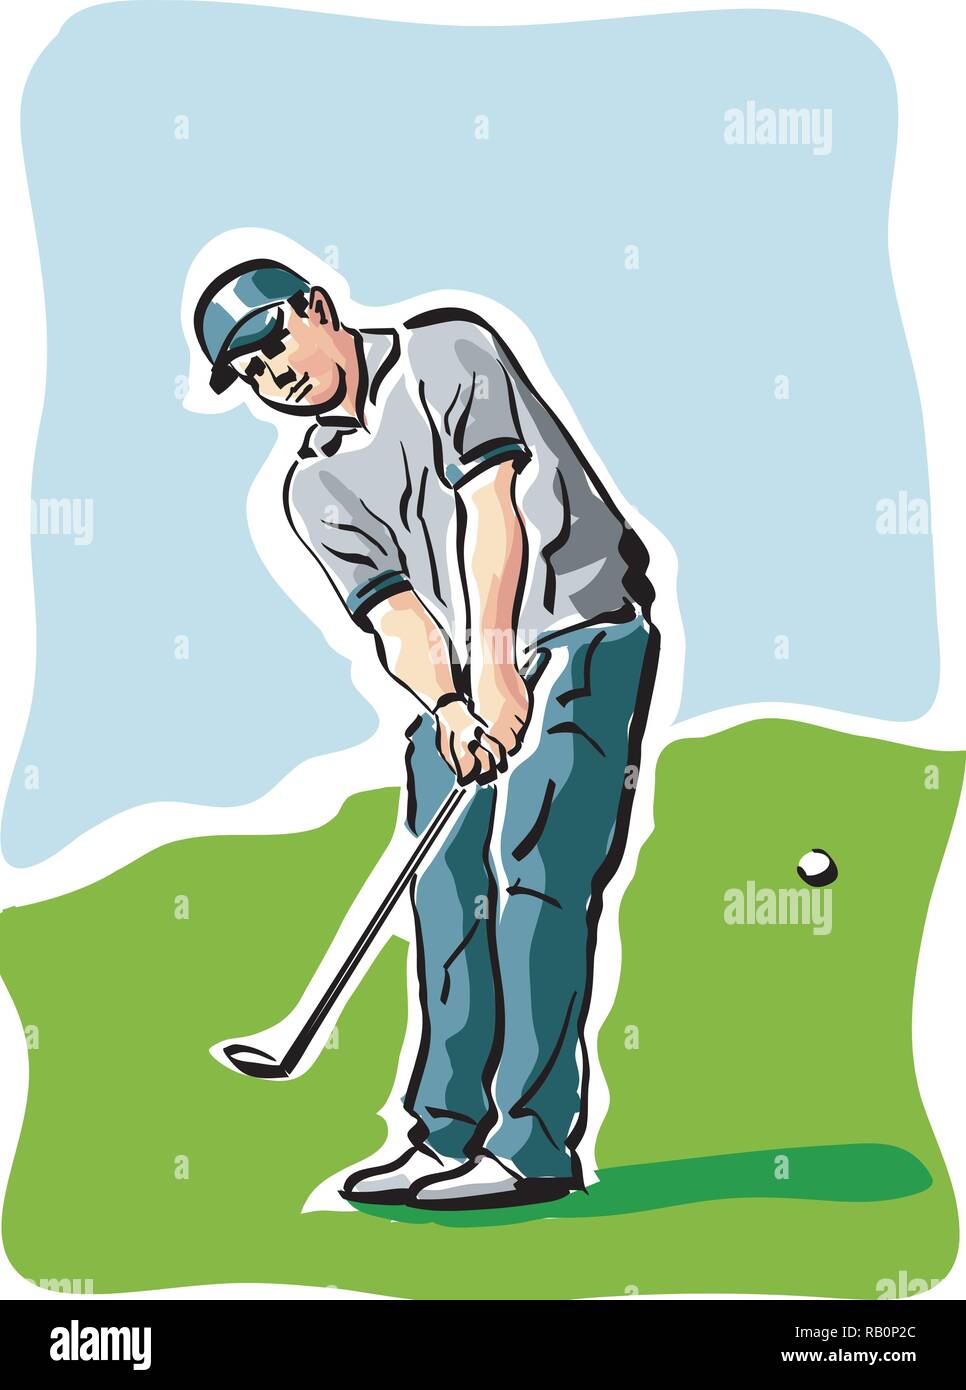 vector Illustration of a golf player Stock Vector